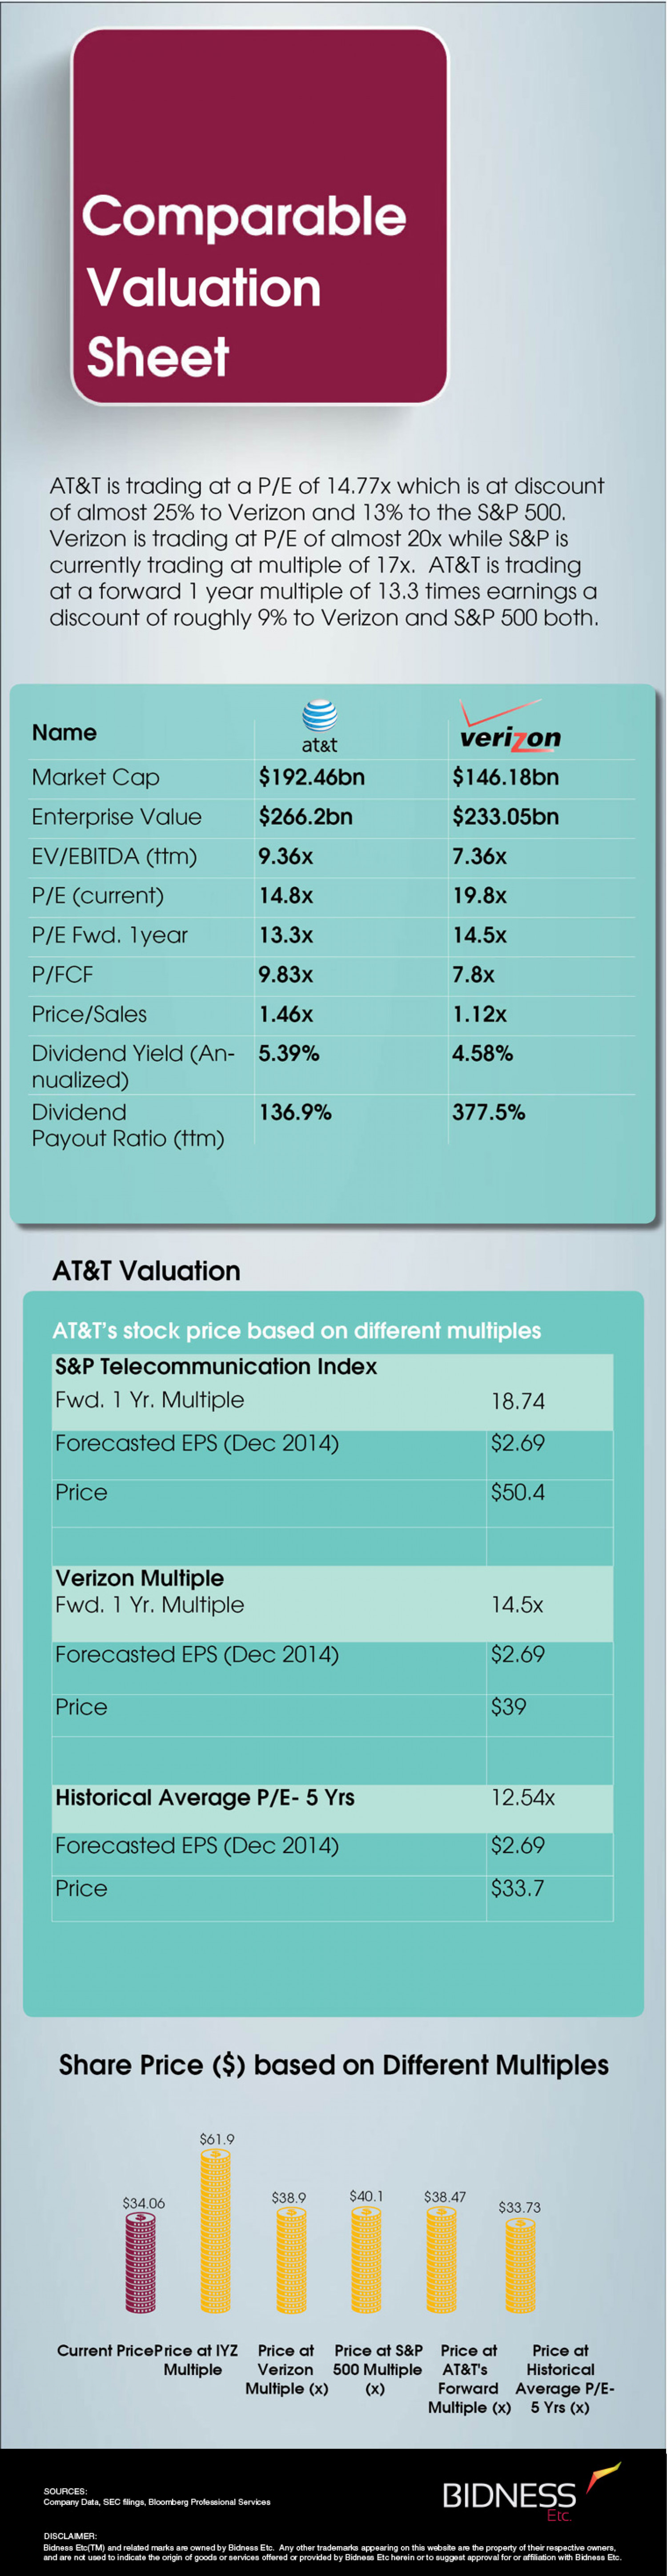 AT&T (T) Valuation Sheet Infographic